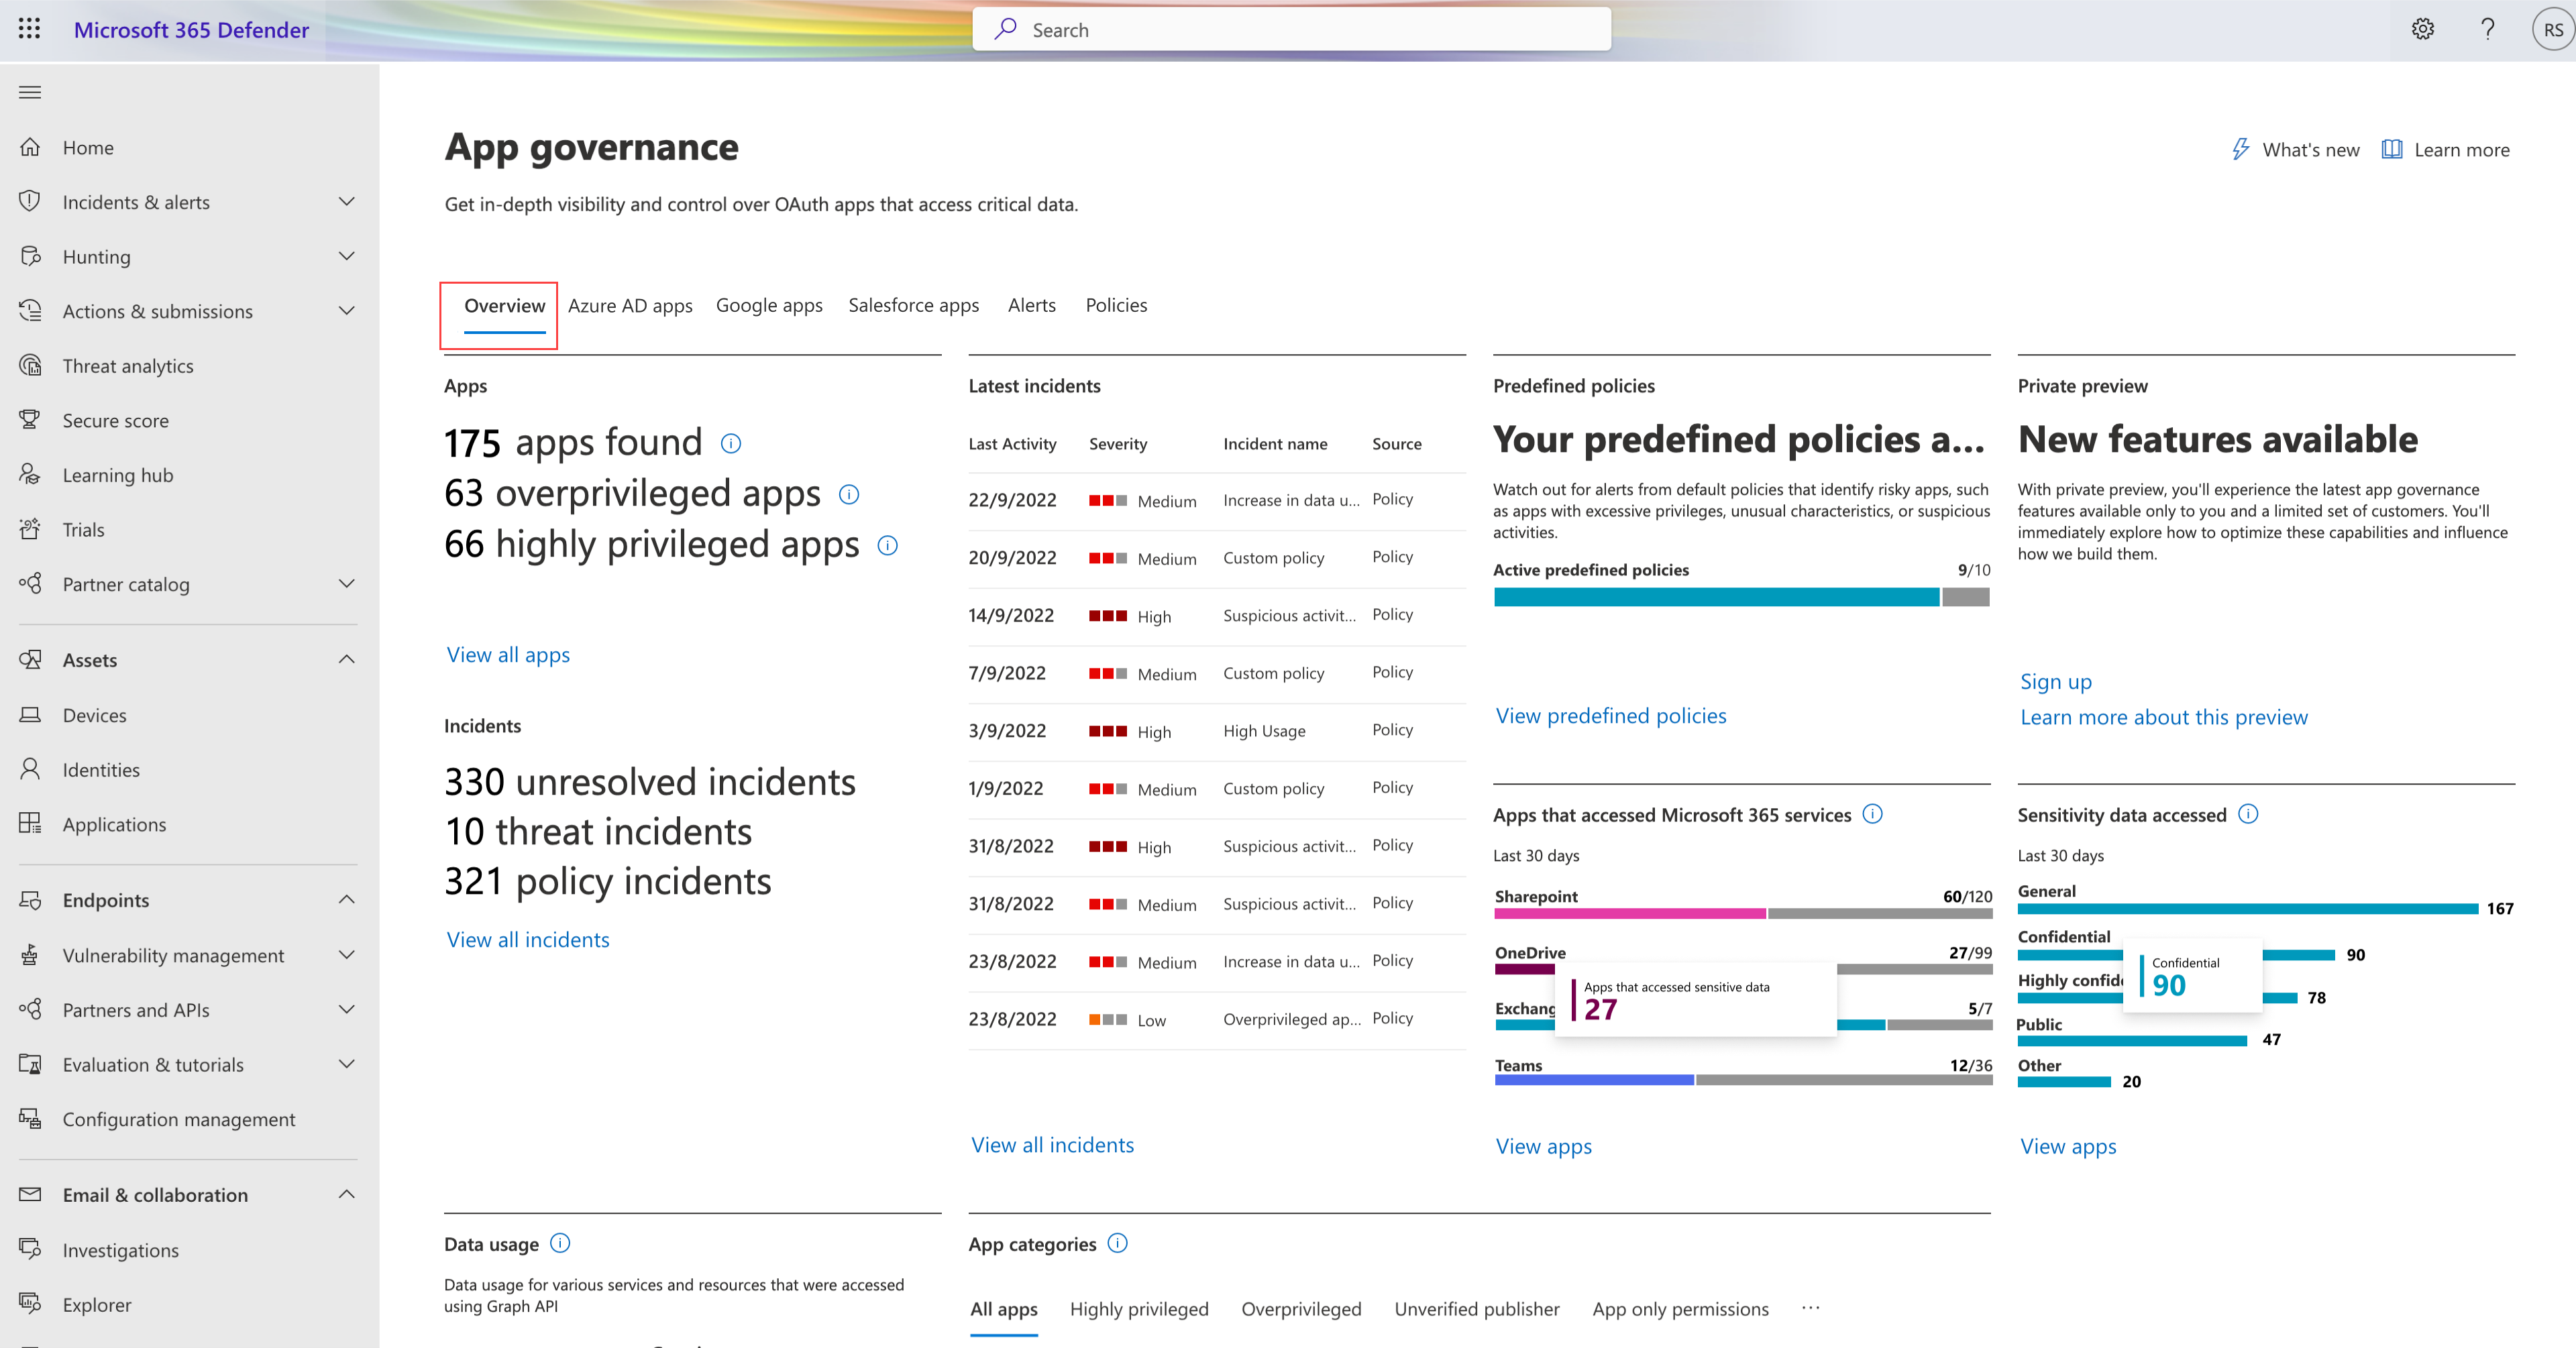 Screenshot of the App governance overview page in Microsoft Defender XDR.